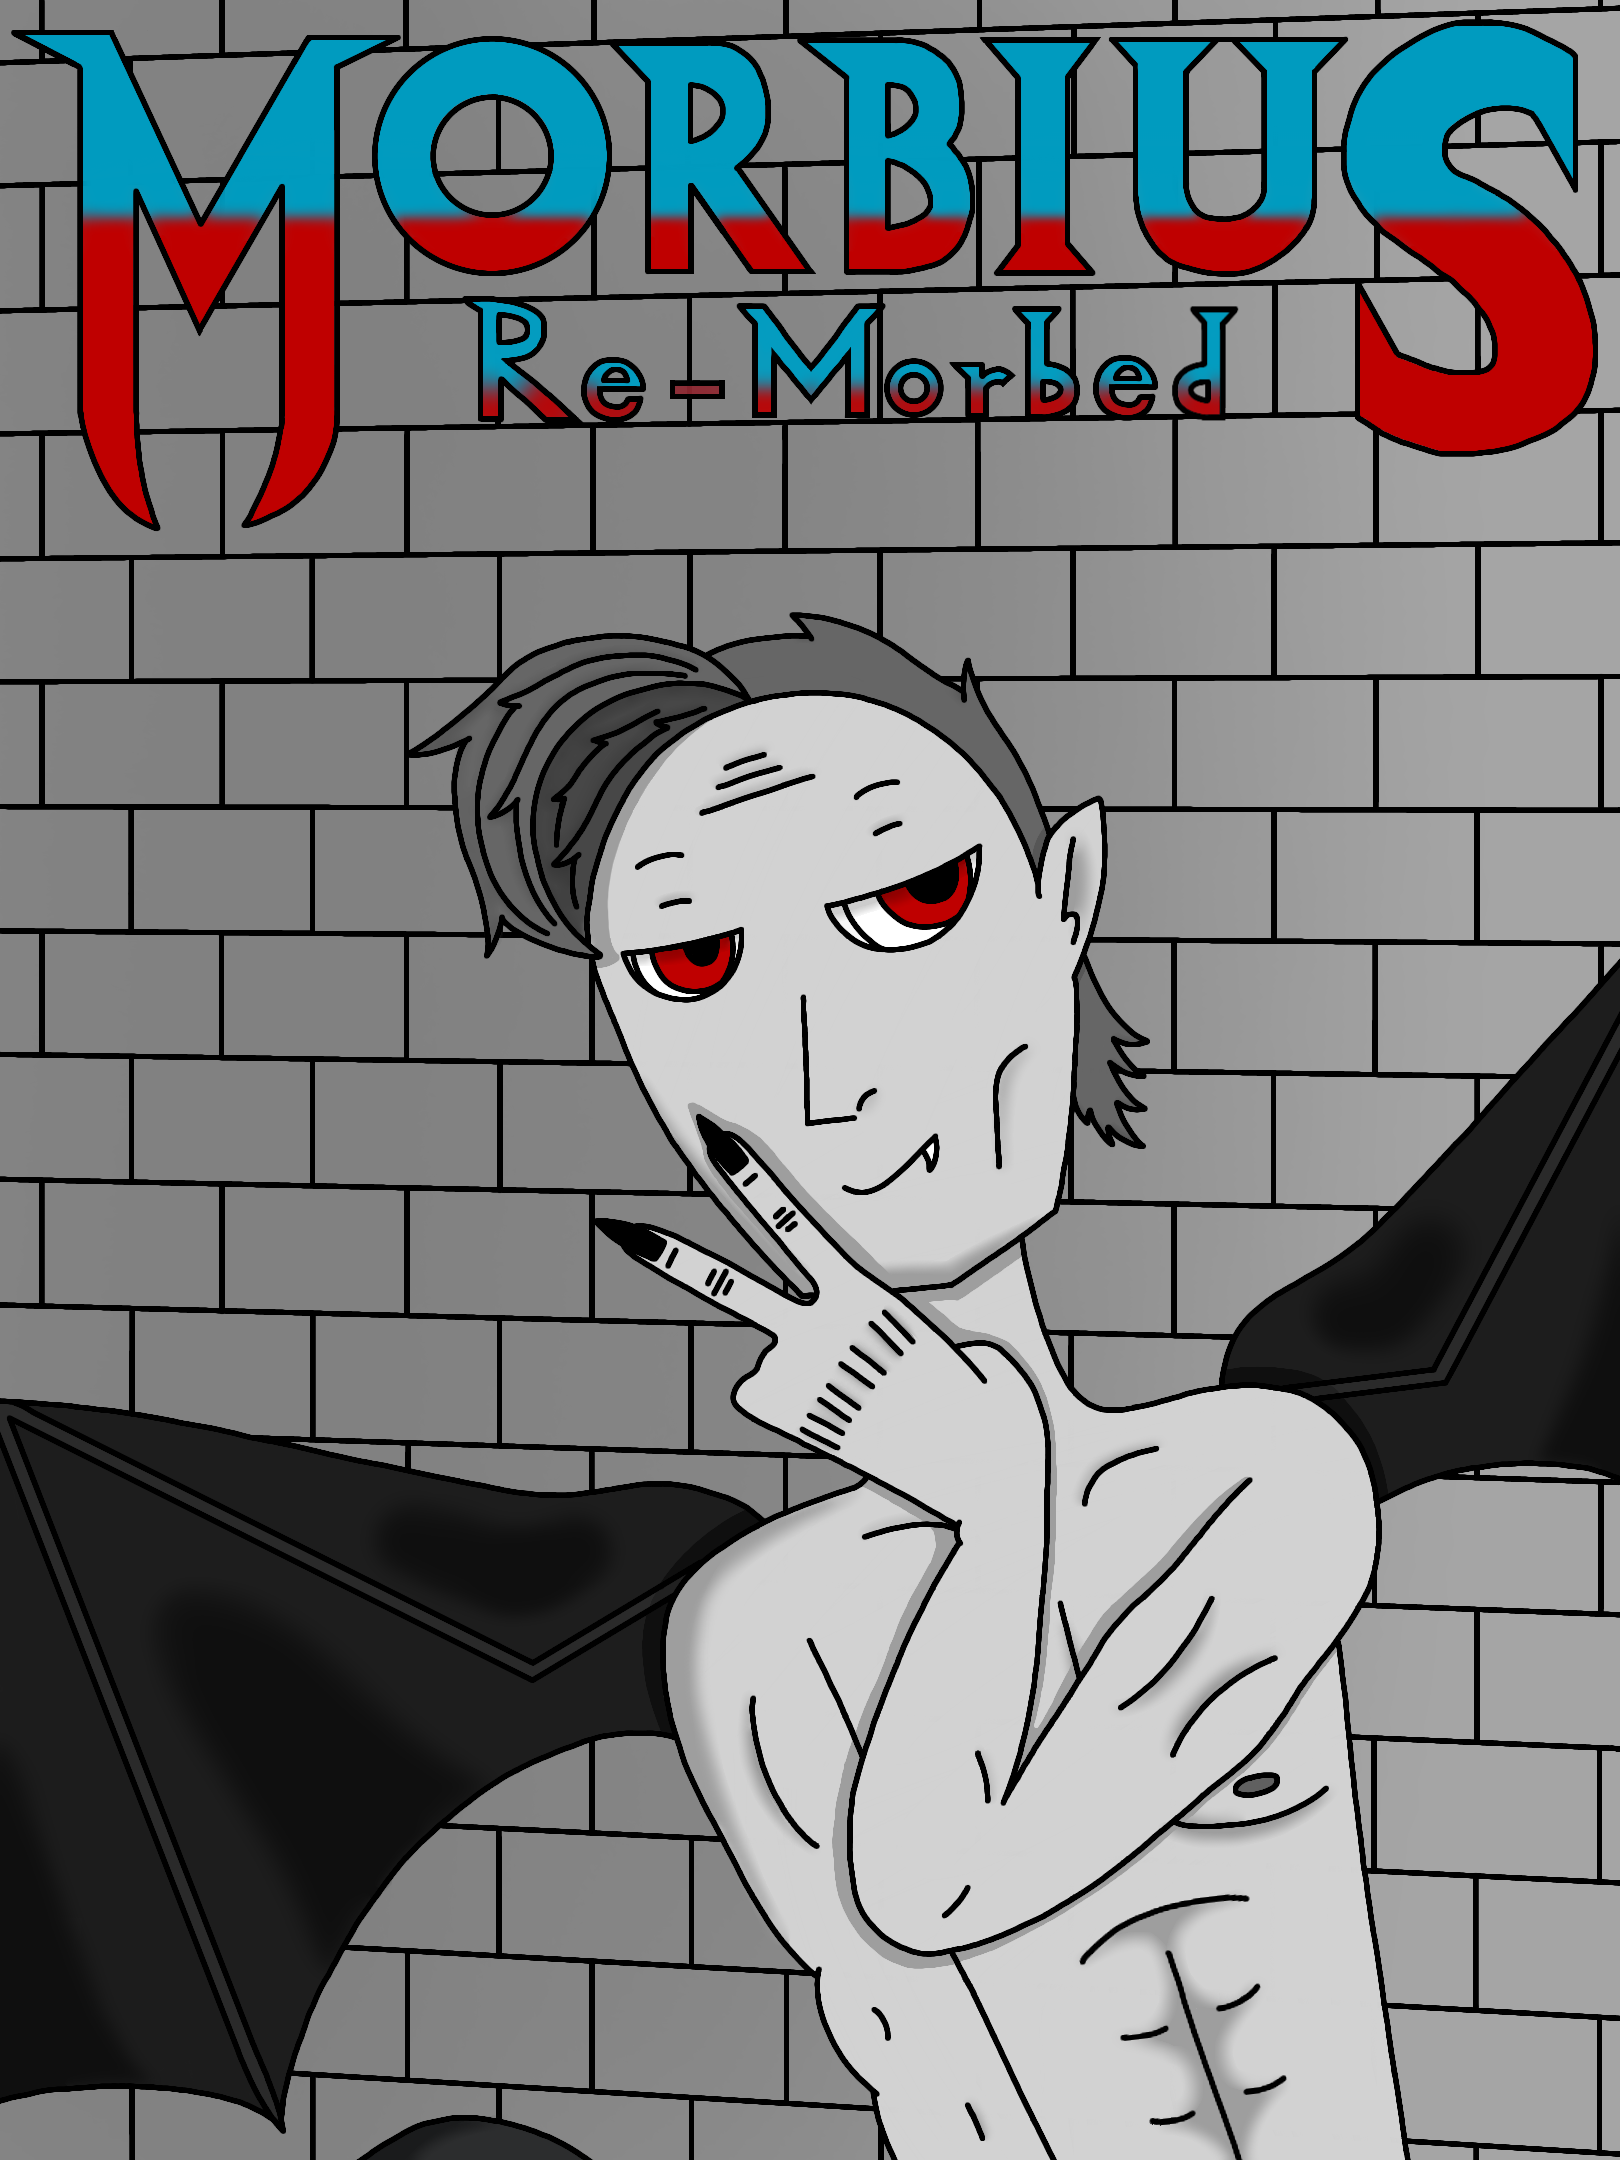 Morbius: Re-Morbed Cover